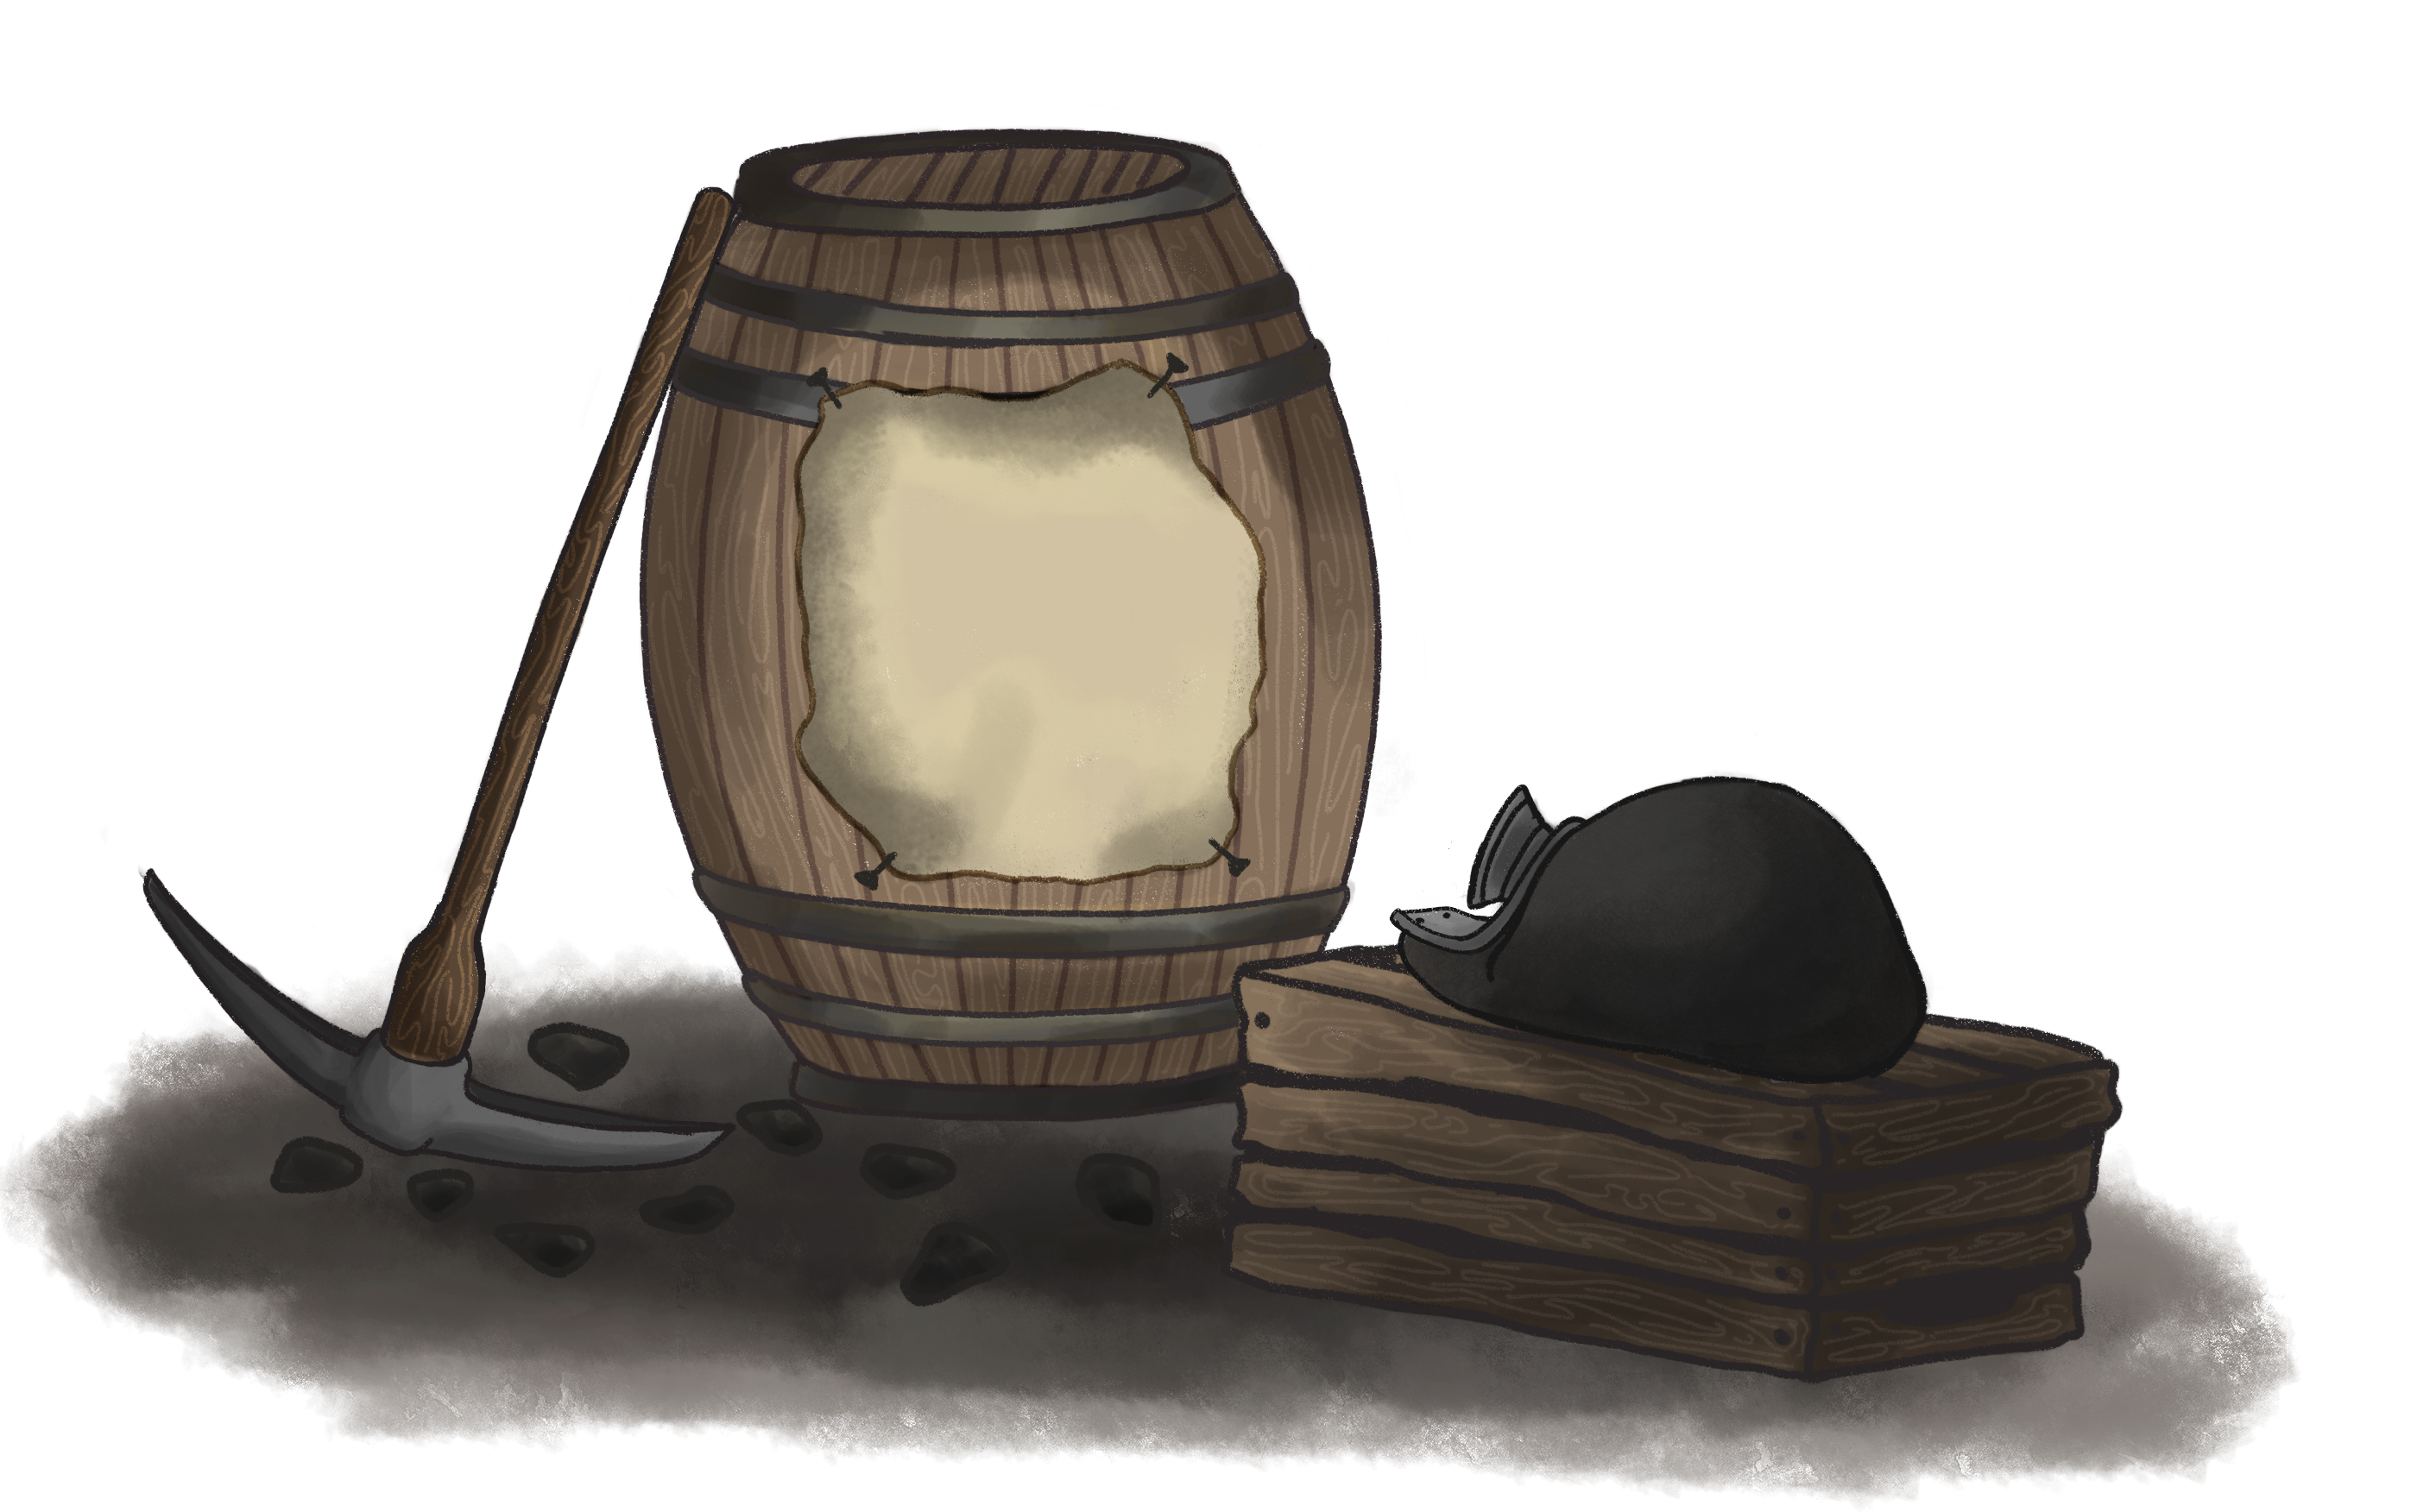 Sketch of Wooden barrel, wooden crate with mining helmet, and axe surrounded by coal nuggets.